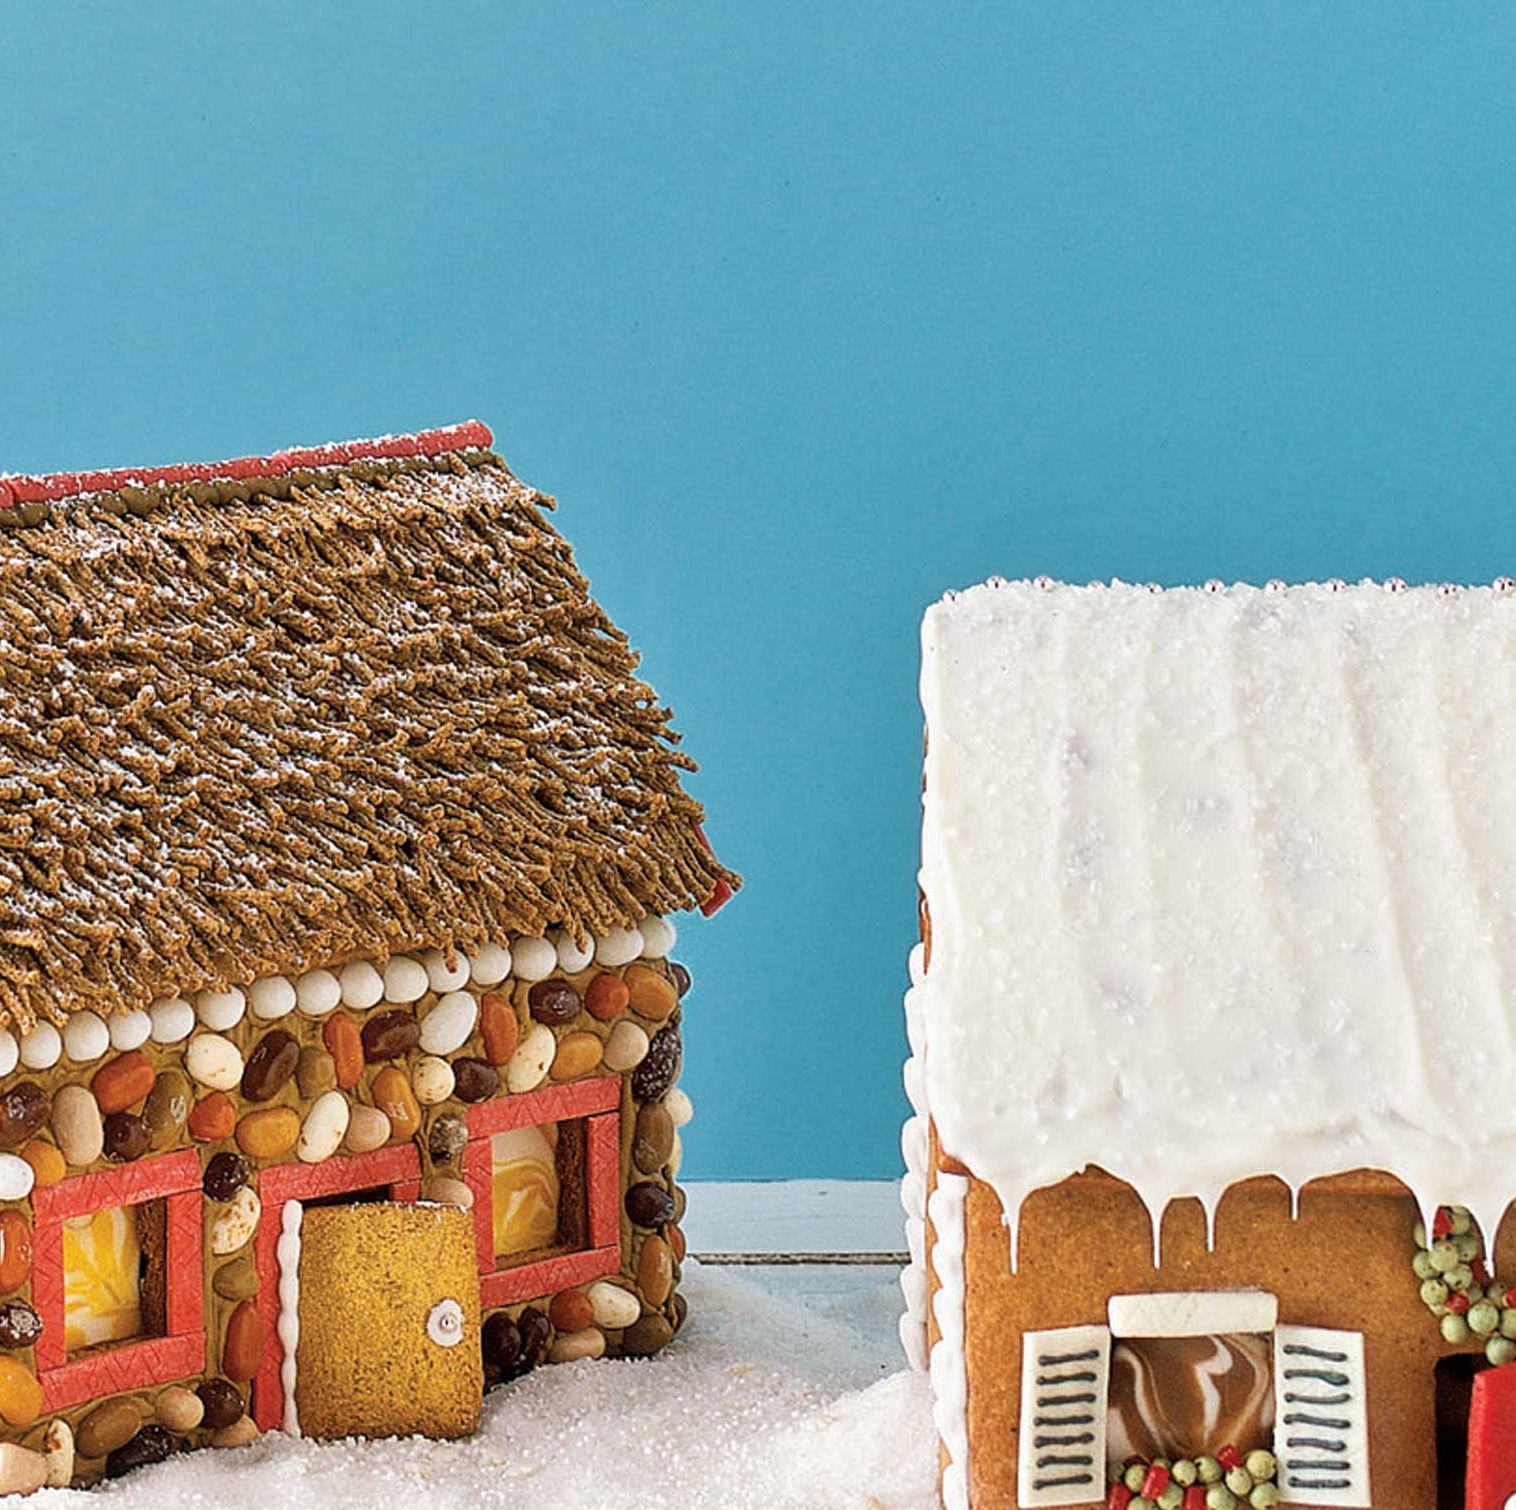 amazing gingerbread houses